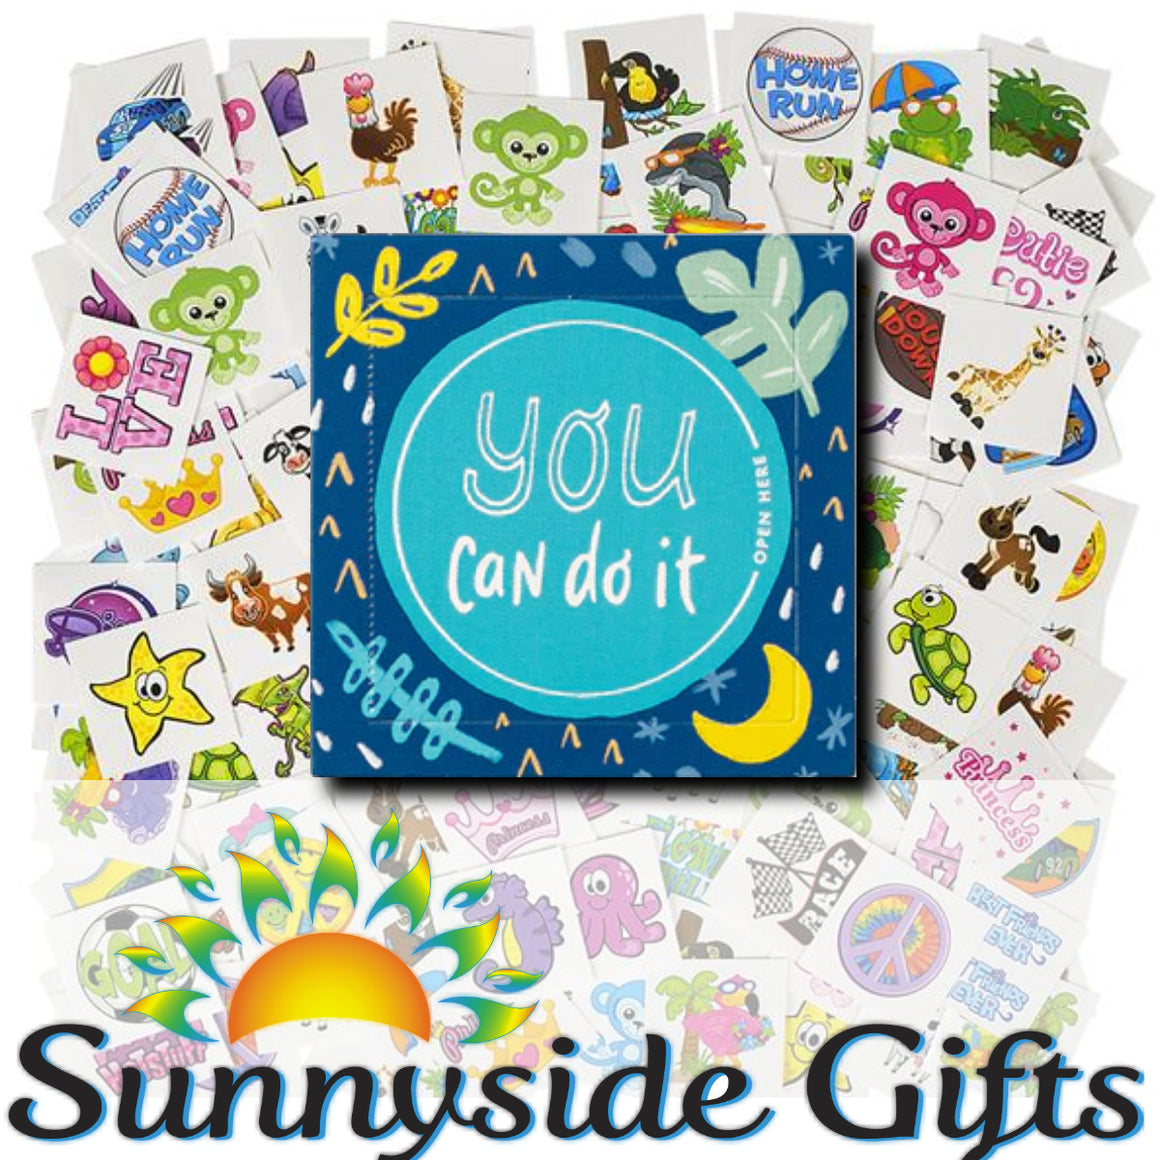 "You Can Do It!" Happy Day Encouragement Surprise Smiles for Kids (FREE shipping*)